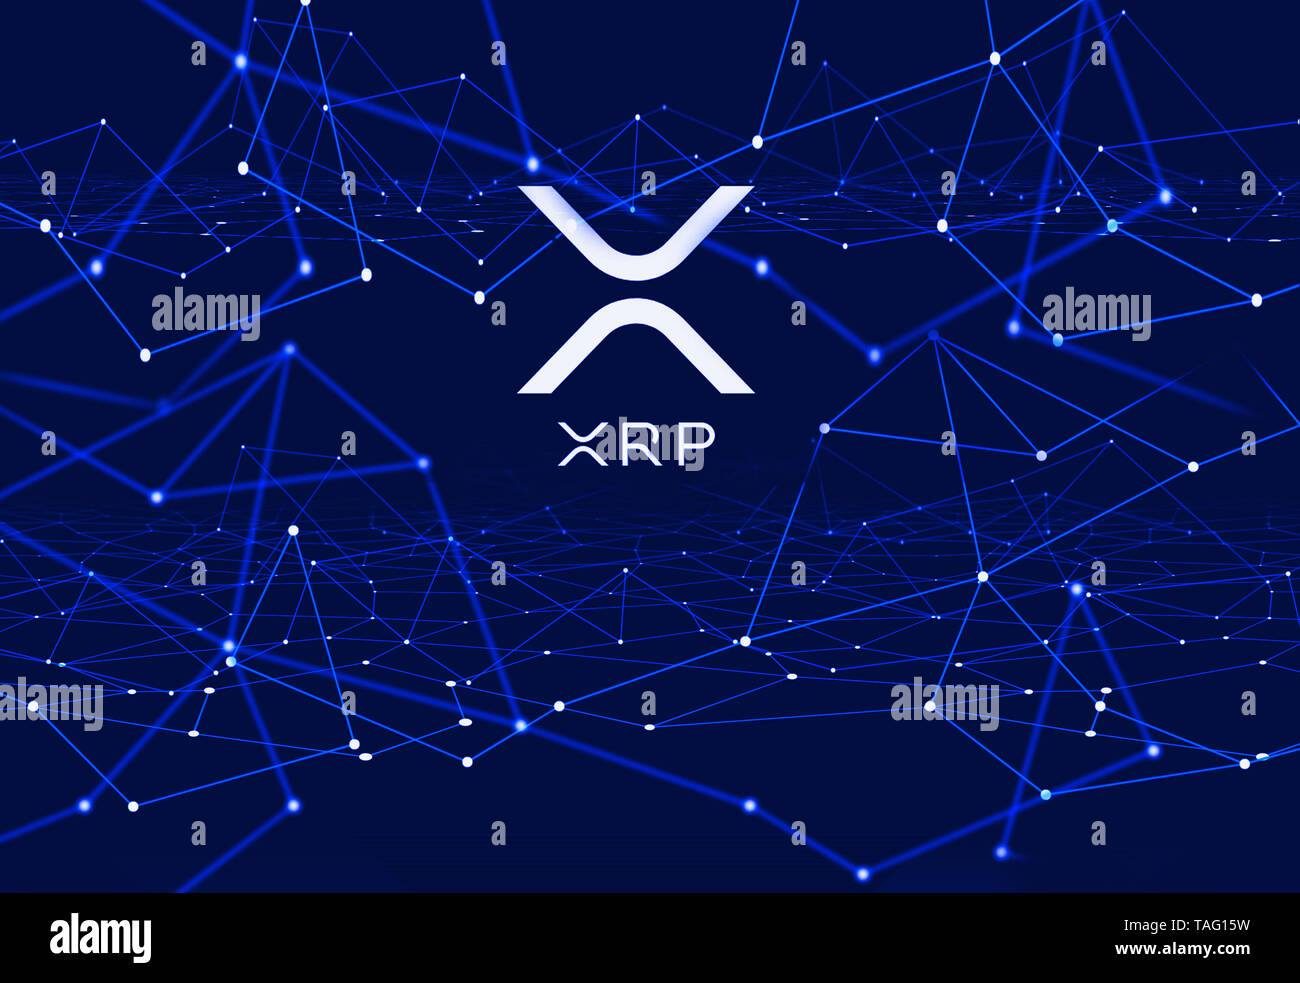 Cryptocurrency ripple xrp wallpaper valid btc wallet address